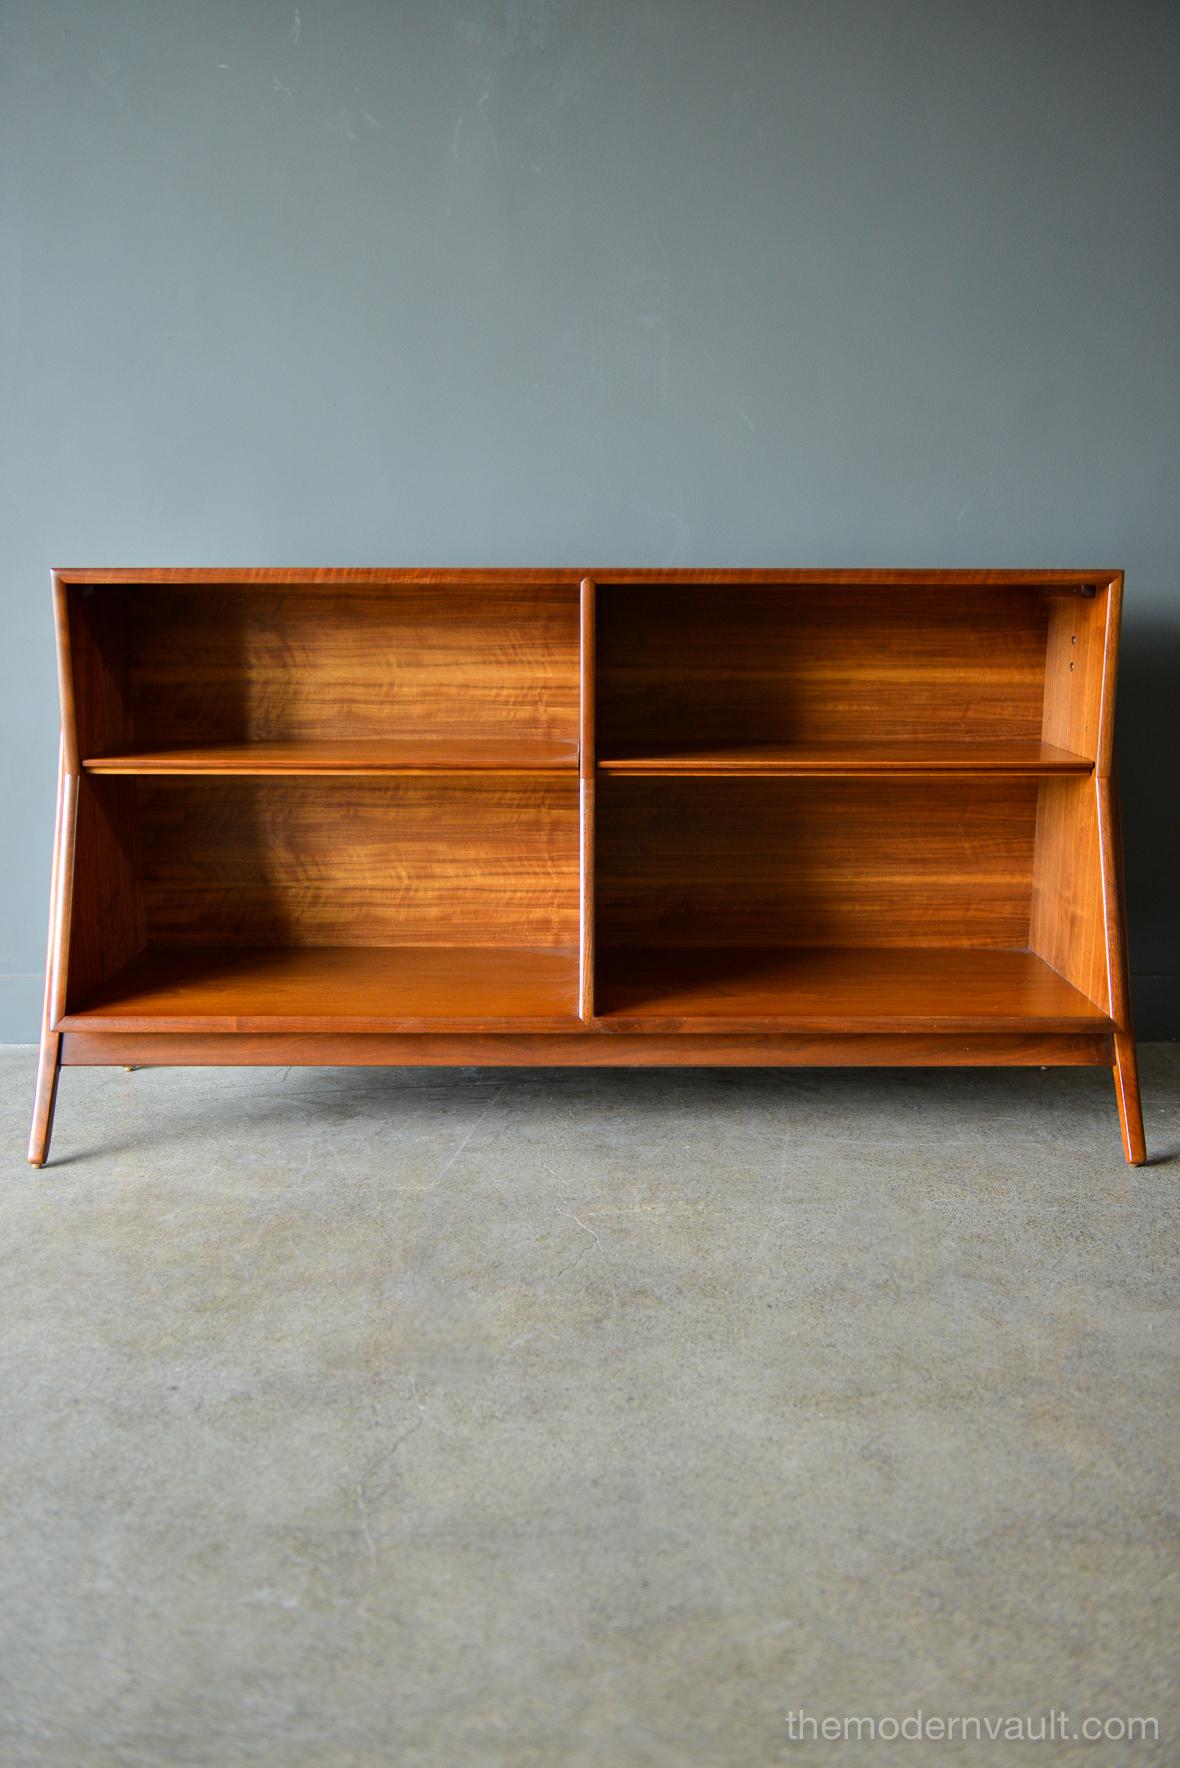 Sculptural walnut bookcase by Kipp Stewart for Drexel, circa 1965.  Rare walnut bookcase by Kipp Stewart and Stewart MacDougall for Drexel’s Declaration line. Professionally restored to showroom perfect condition, this rare piece is perfect for just